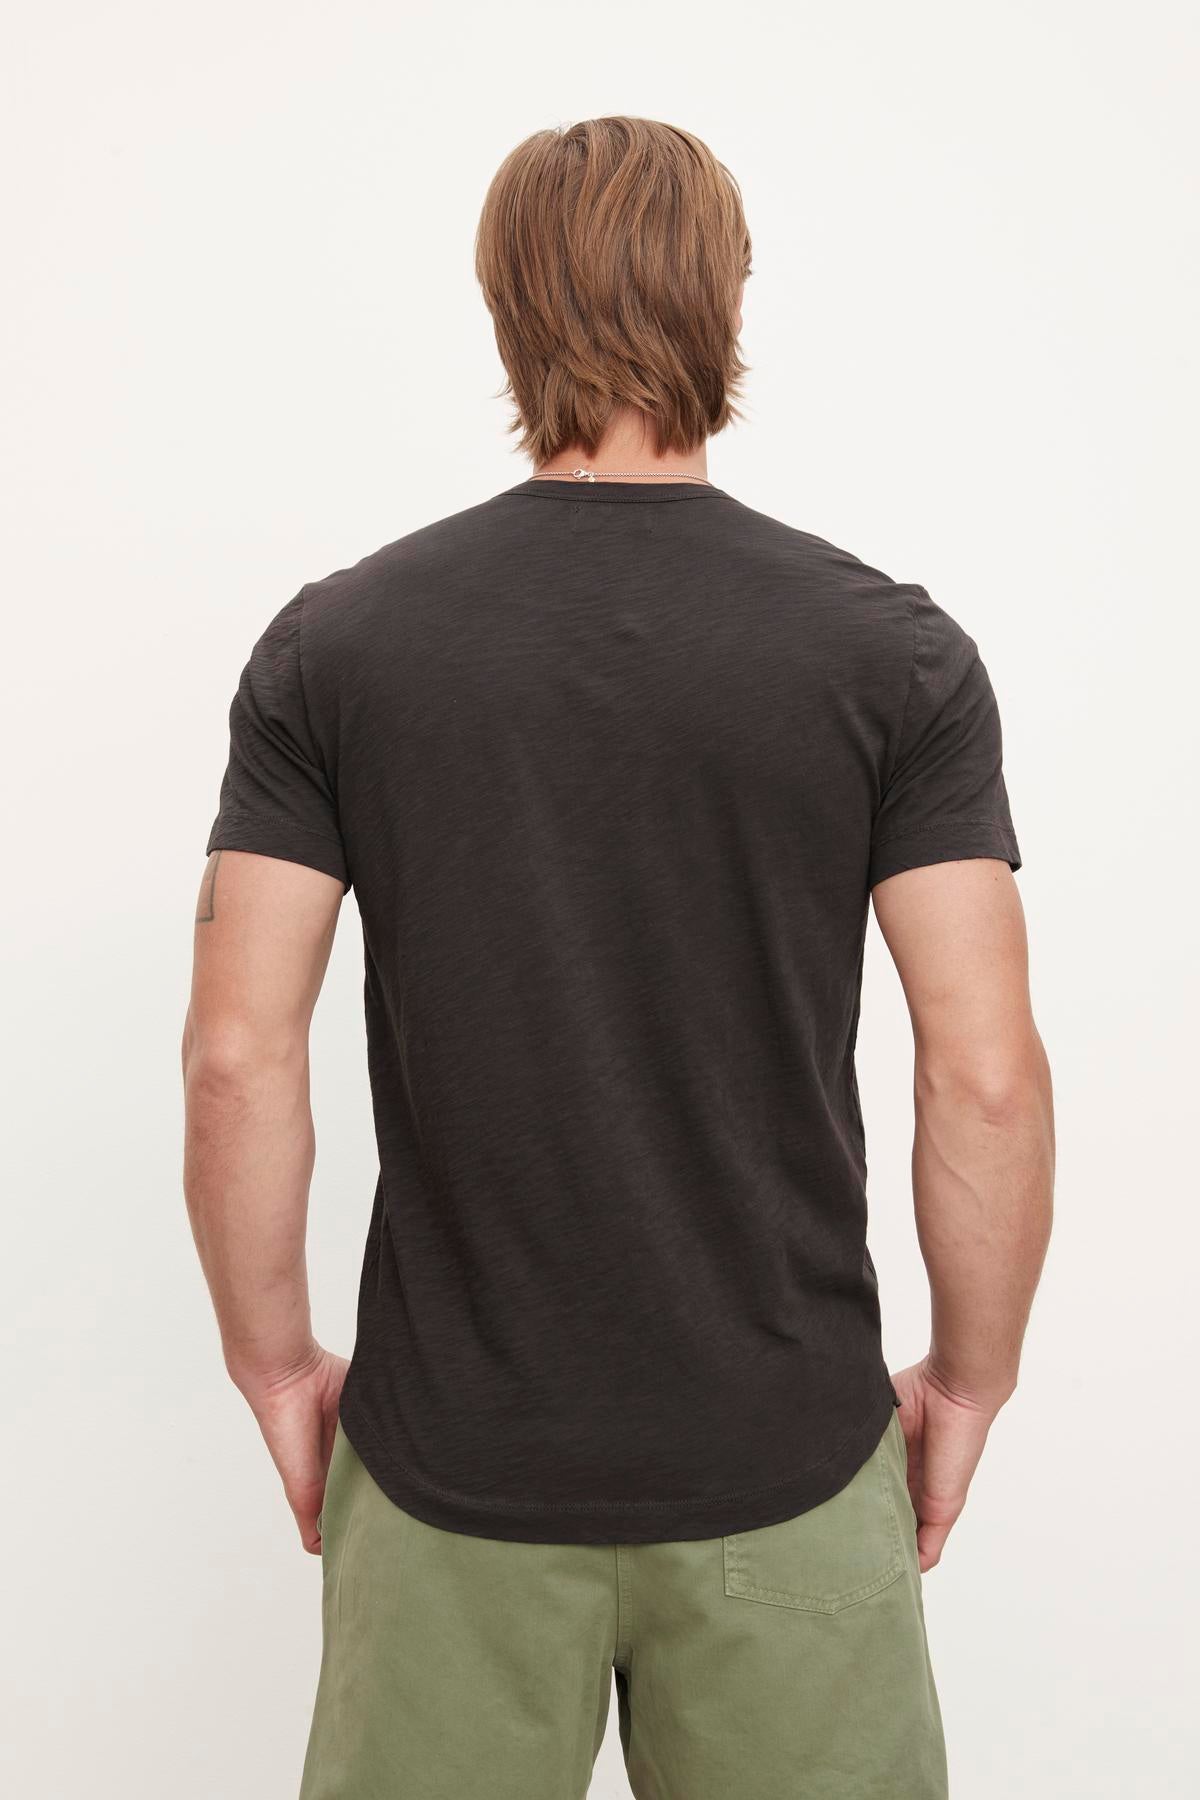   Man standing with his back to the camera wearing a dark, slub knit AMARO TEE by Velvet by Graham & Spencer and green pants. 